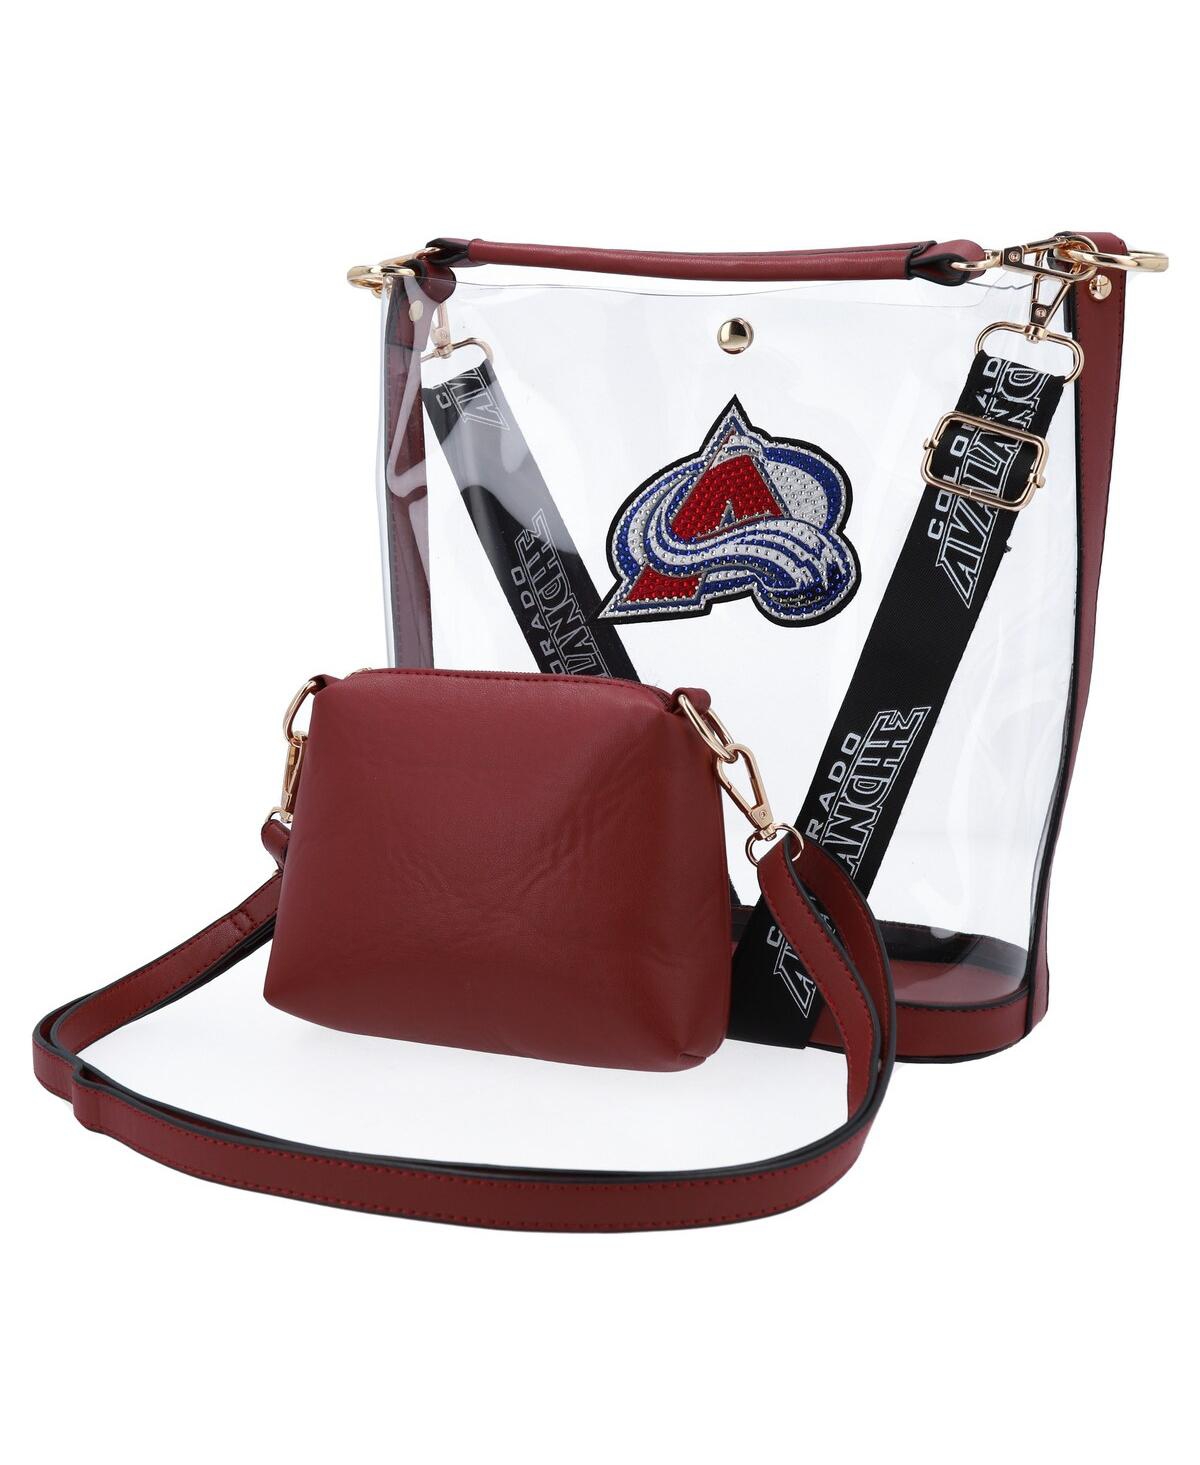 Men's and Women's Cuce Colorado Avalanche RhinestoneÂ Clear Purse - Red